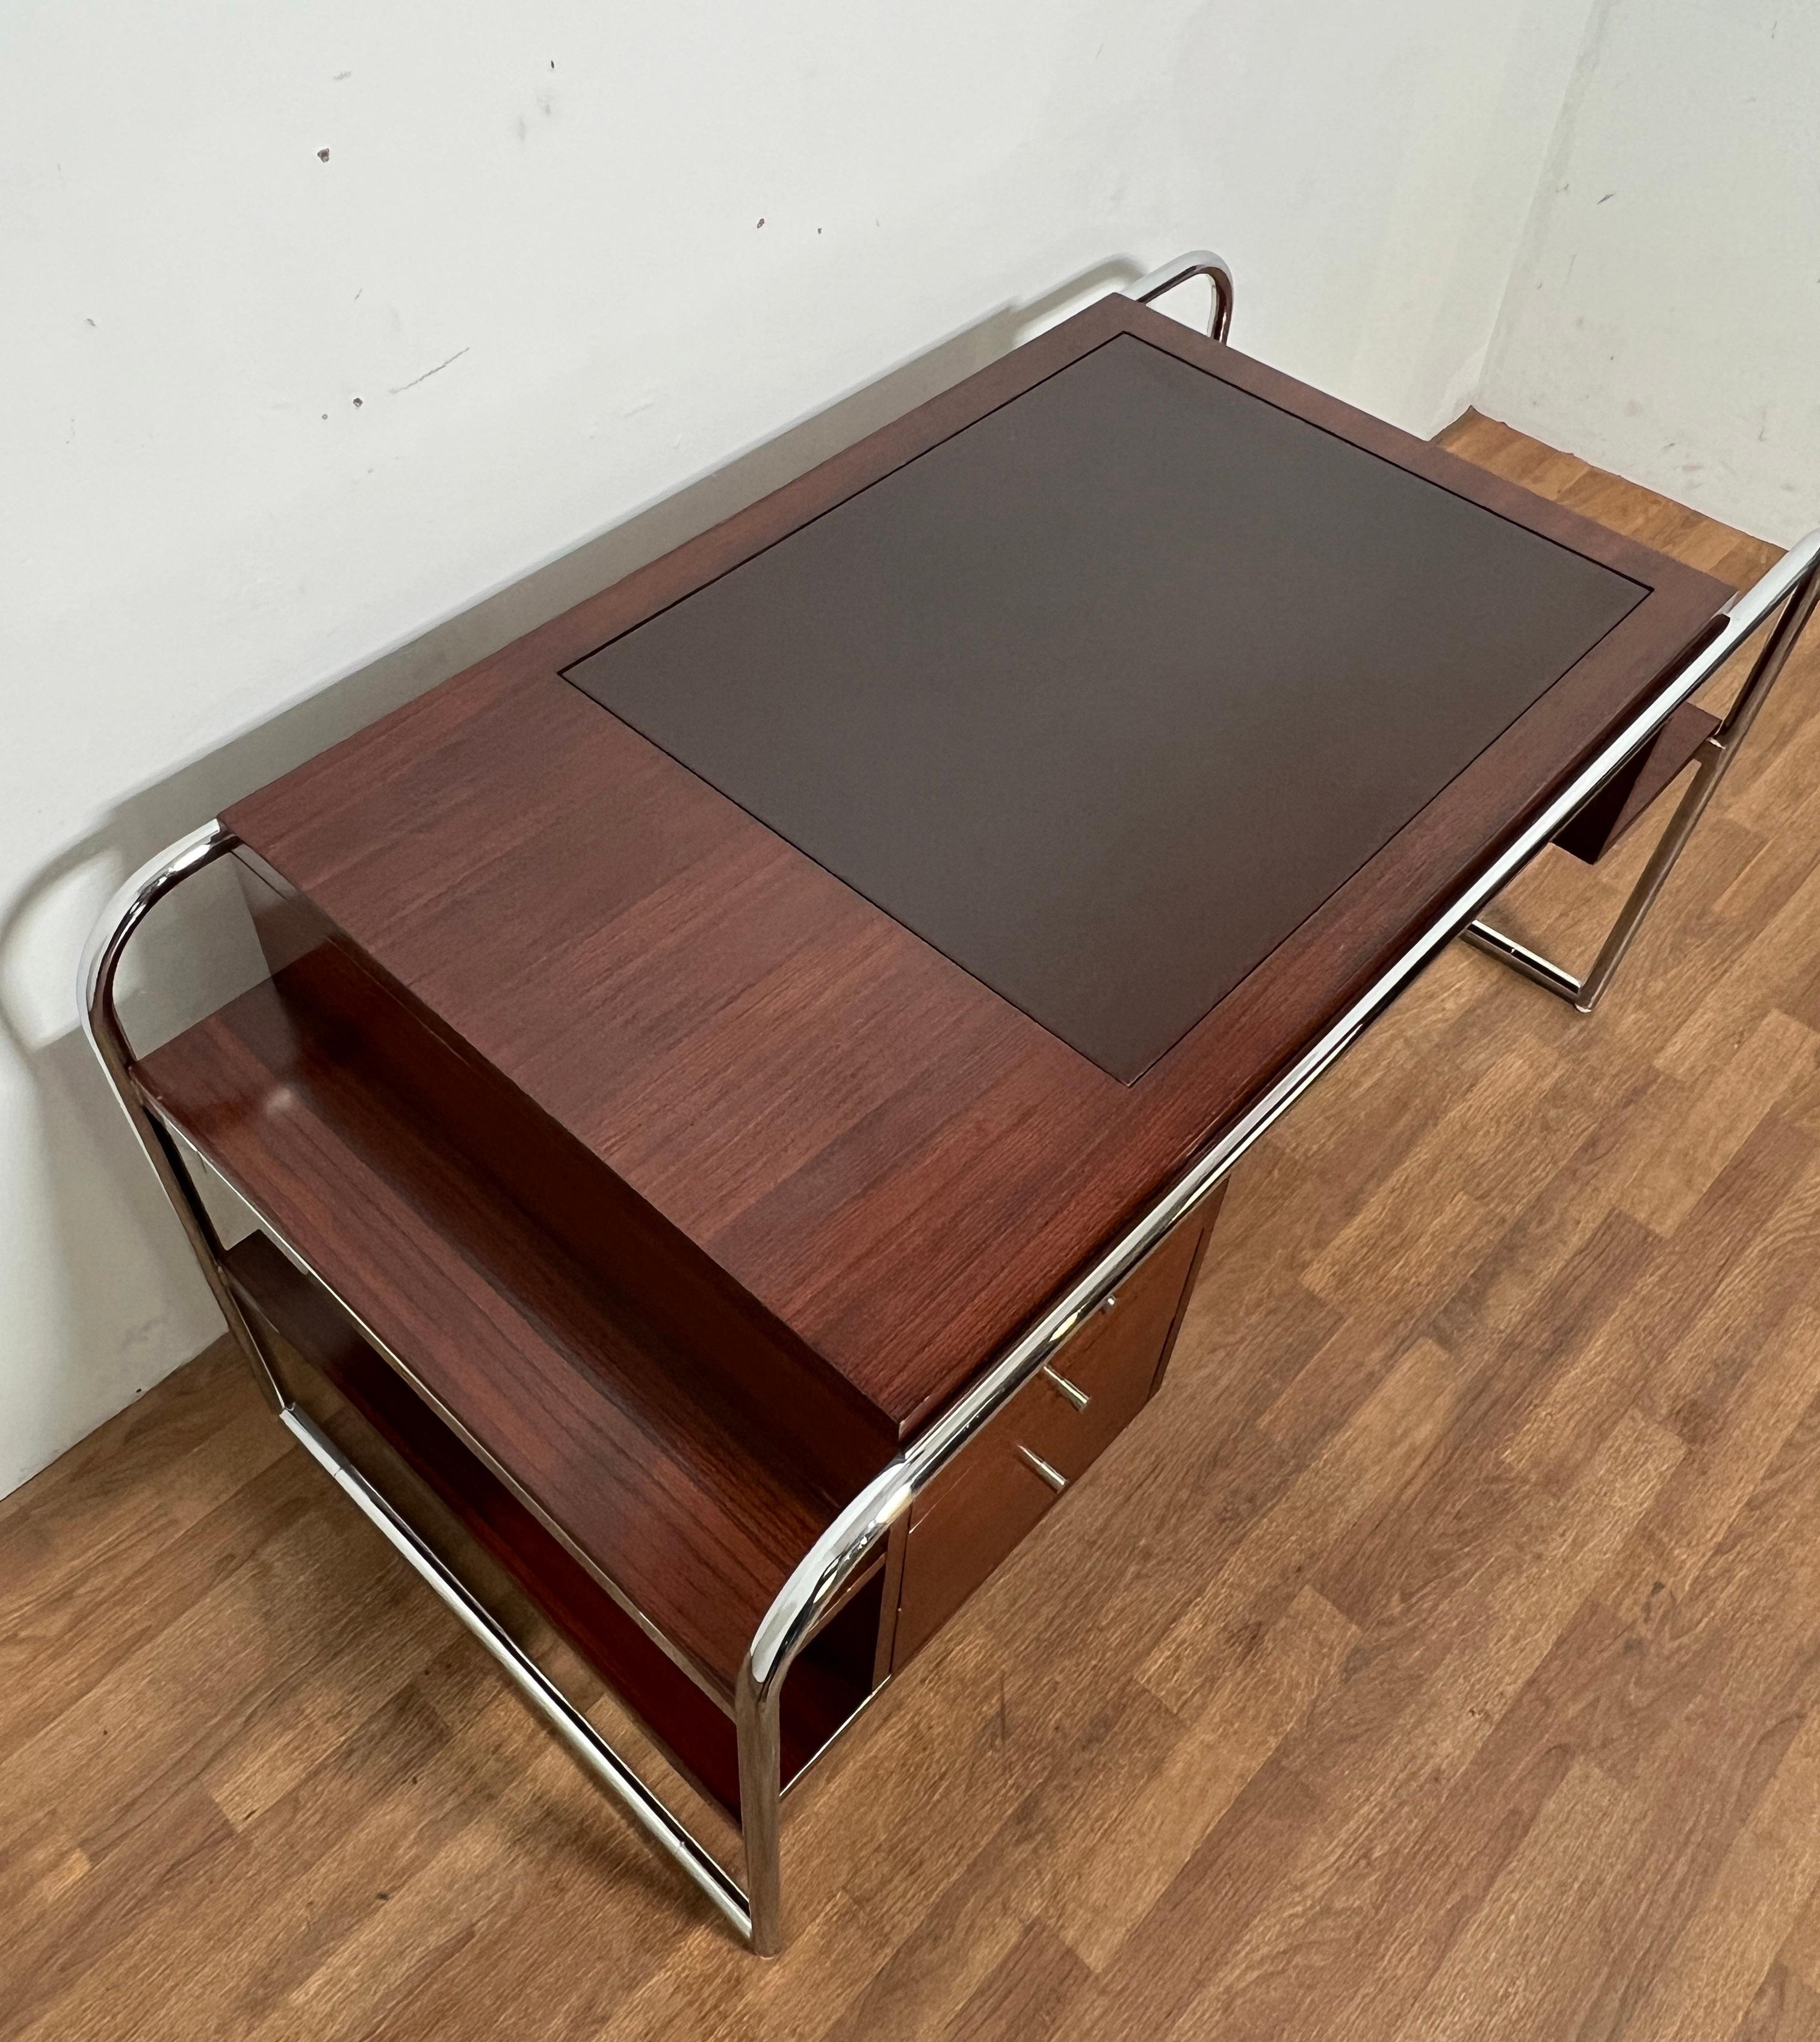 Unknown Ralph Lauren Bauhaus Inspired Desk in Wenge, Chrome and Leather